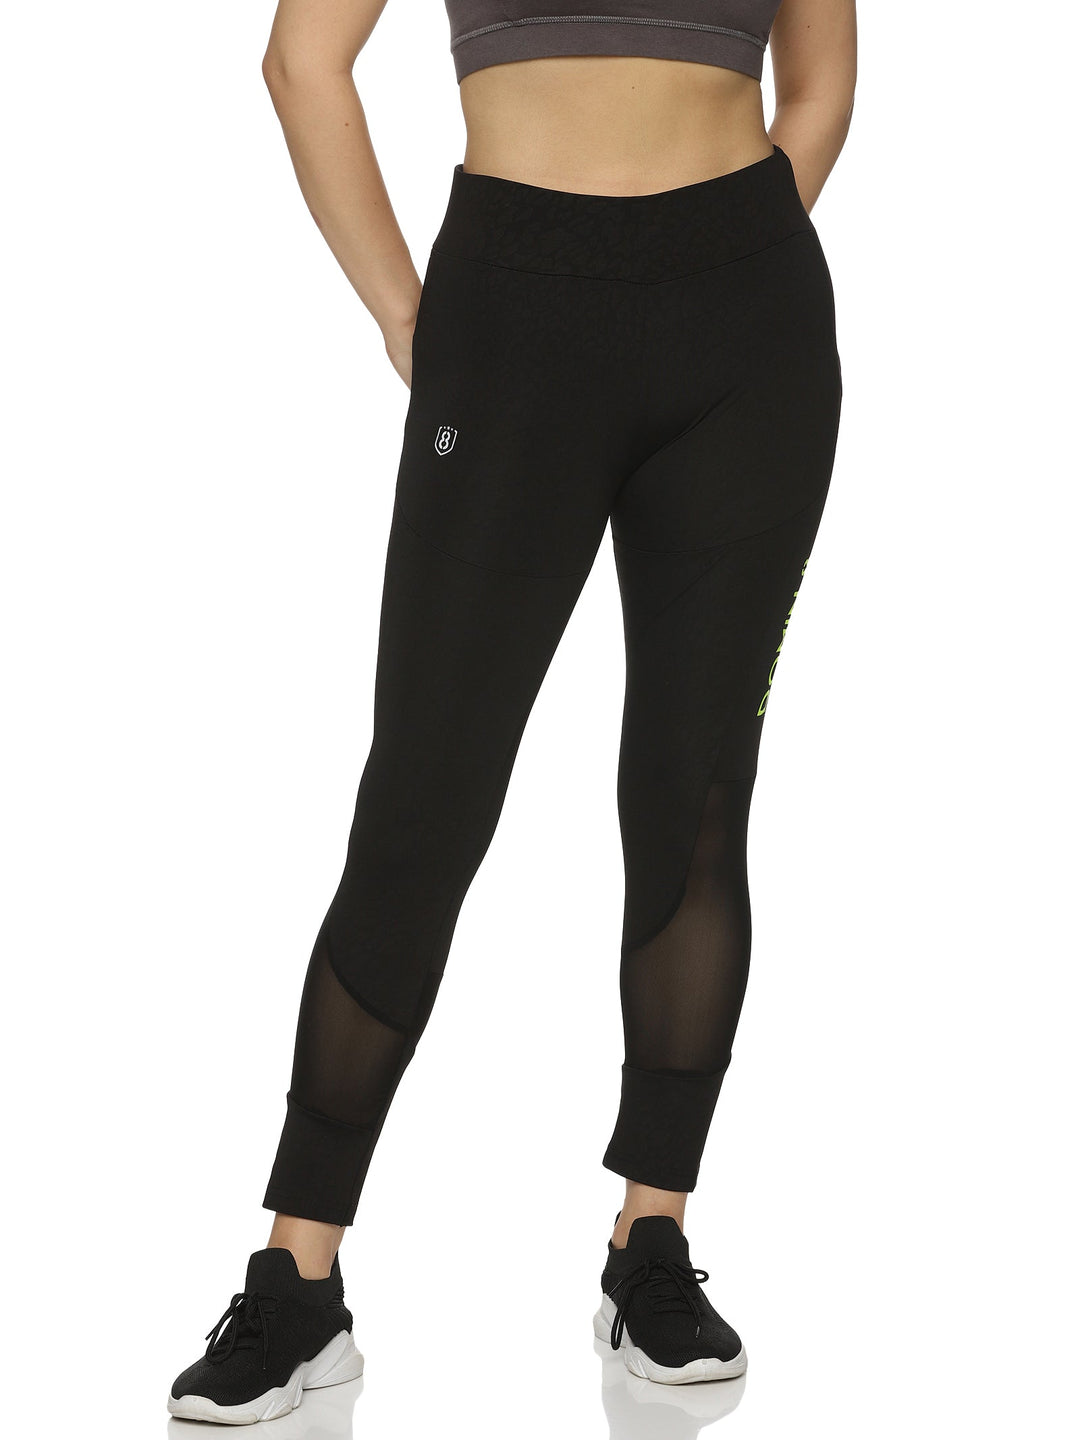 Women's Slim-fit Black Training Tights with Elasticated waist.